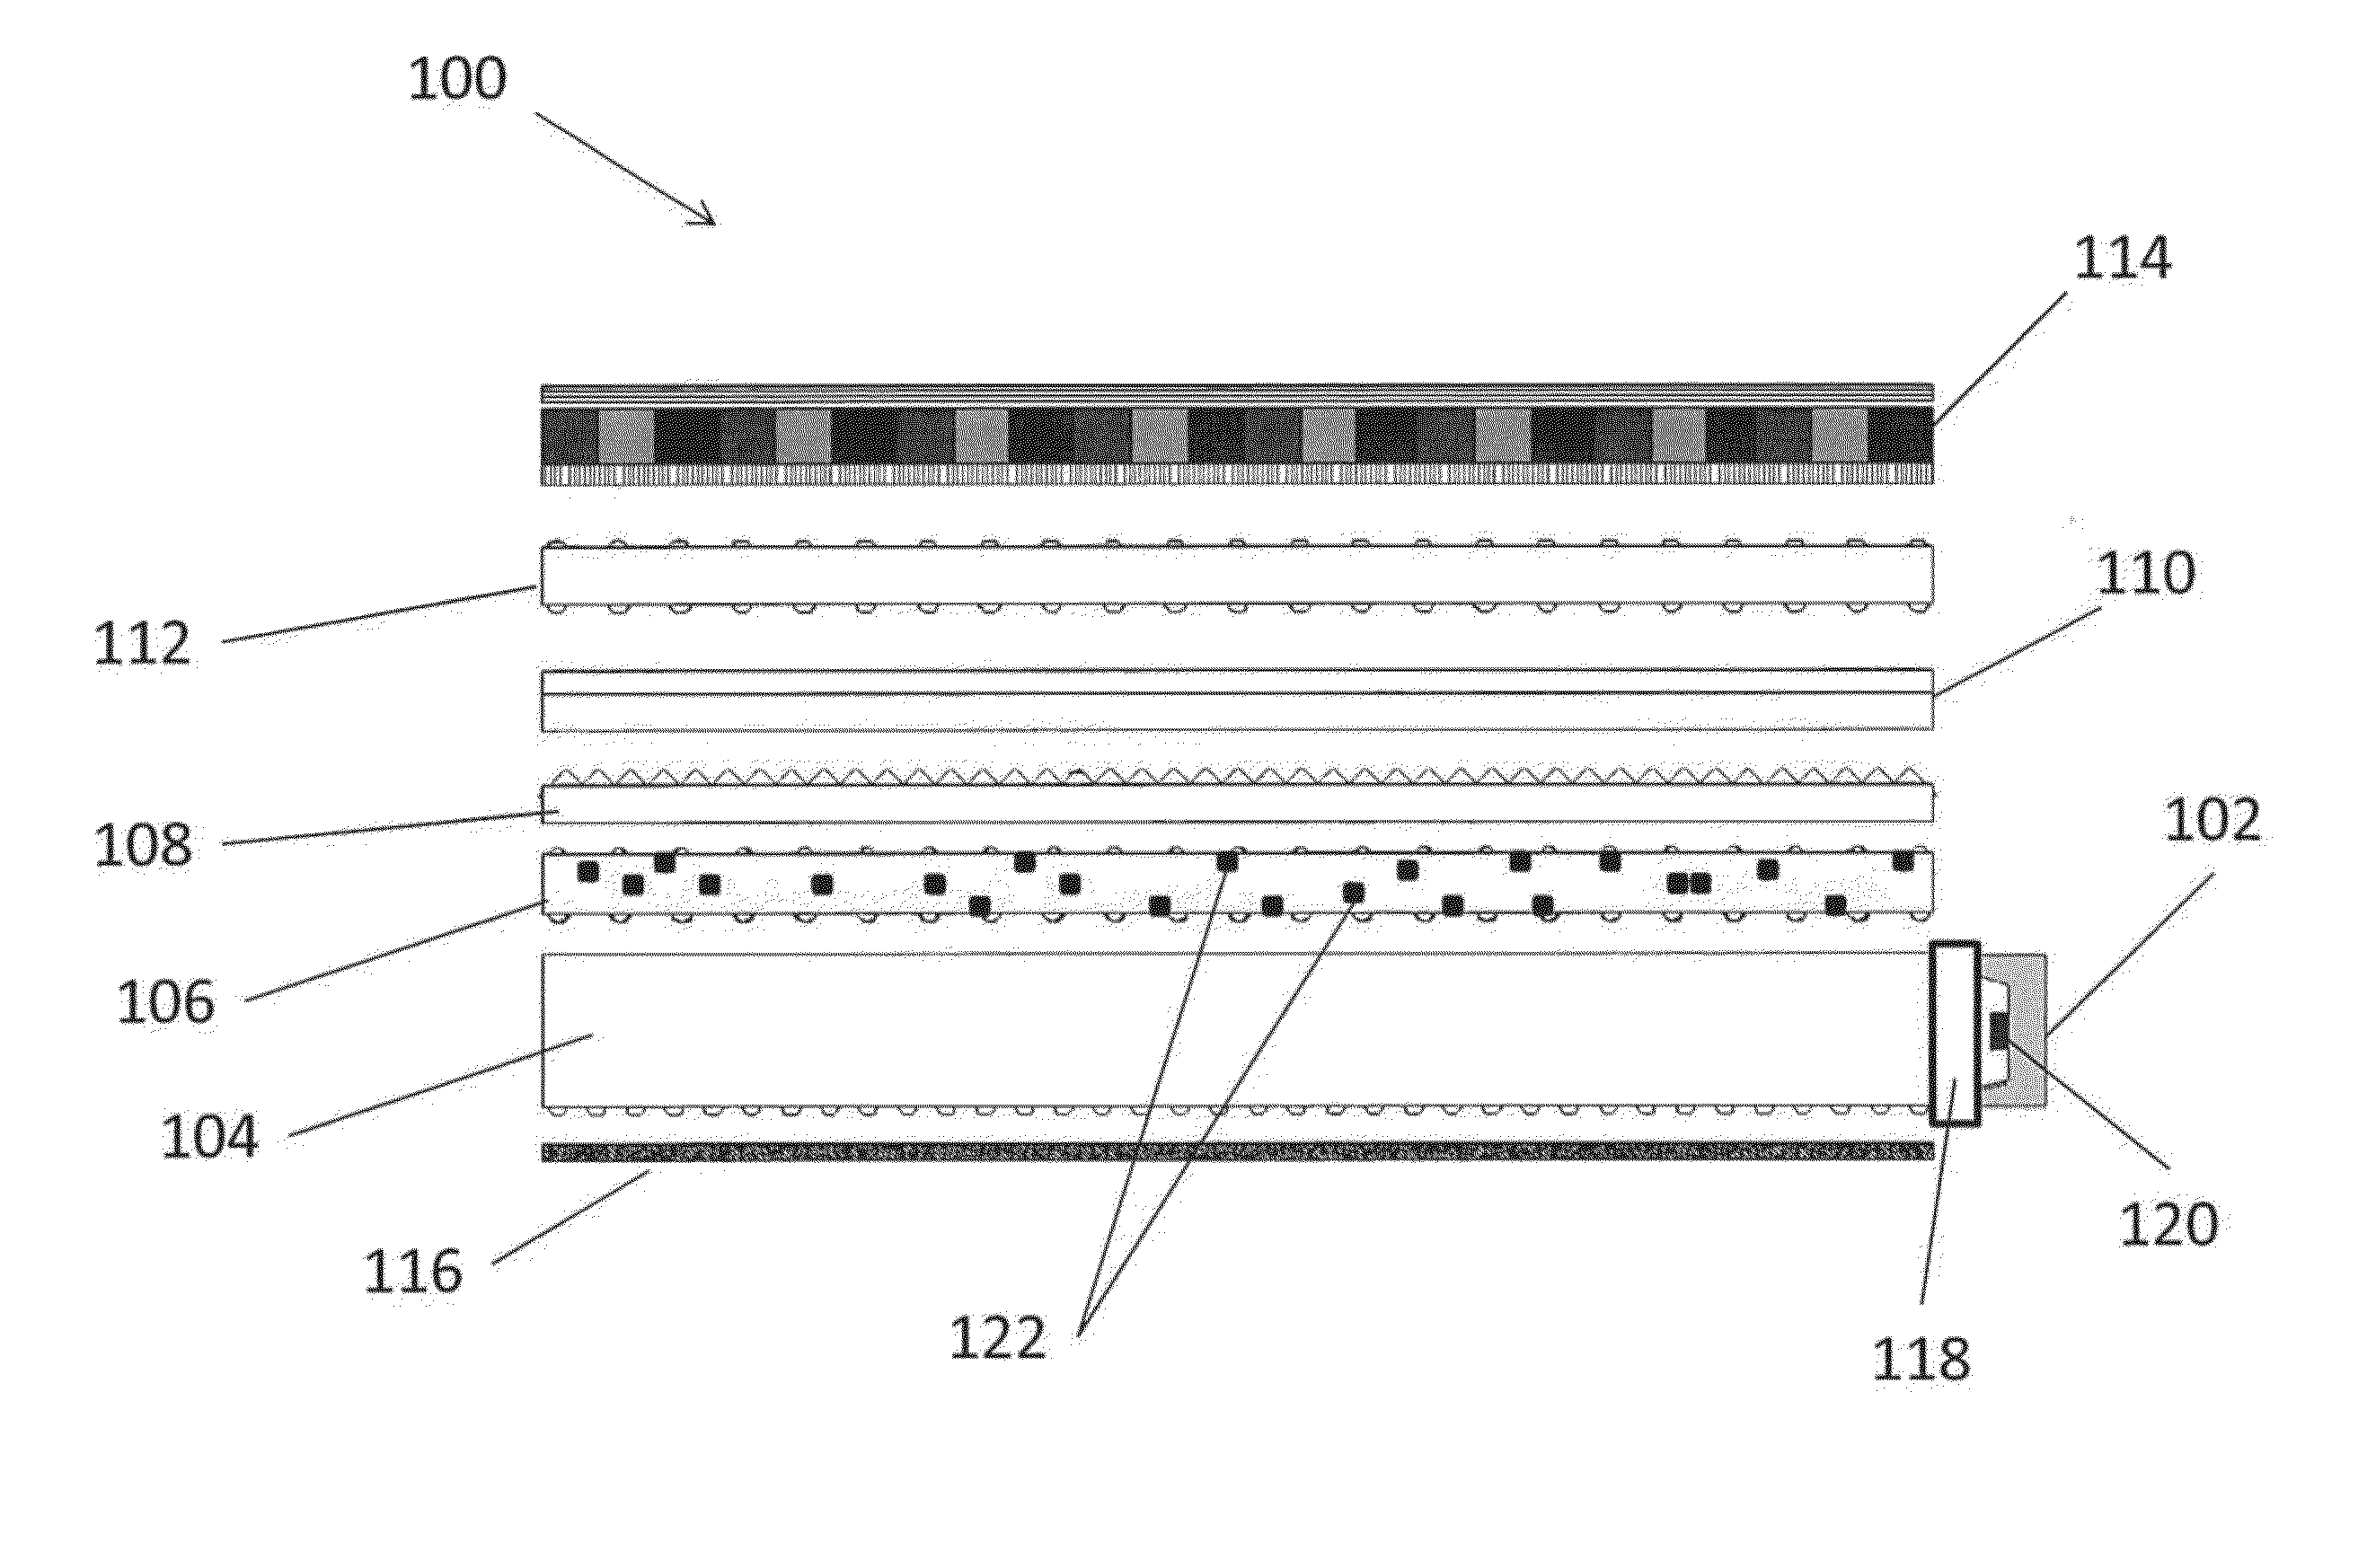 Light emitting diode (LED) devices